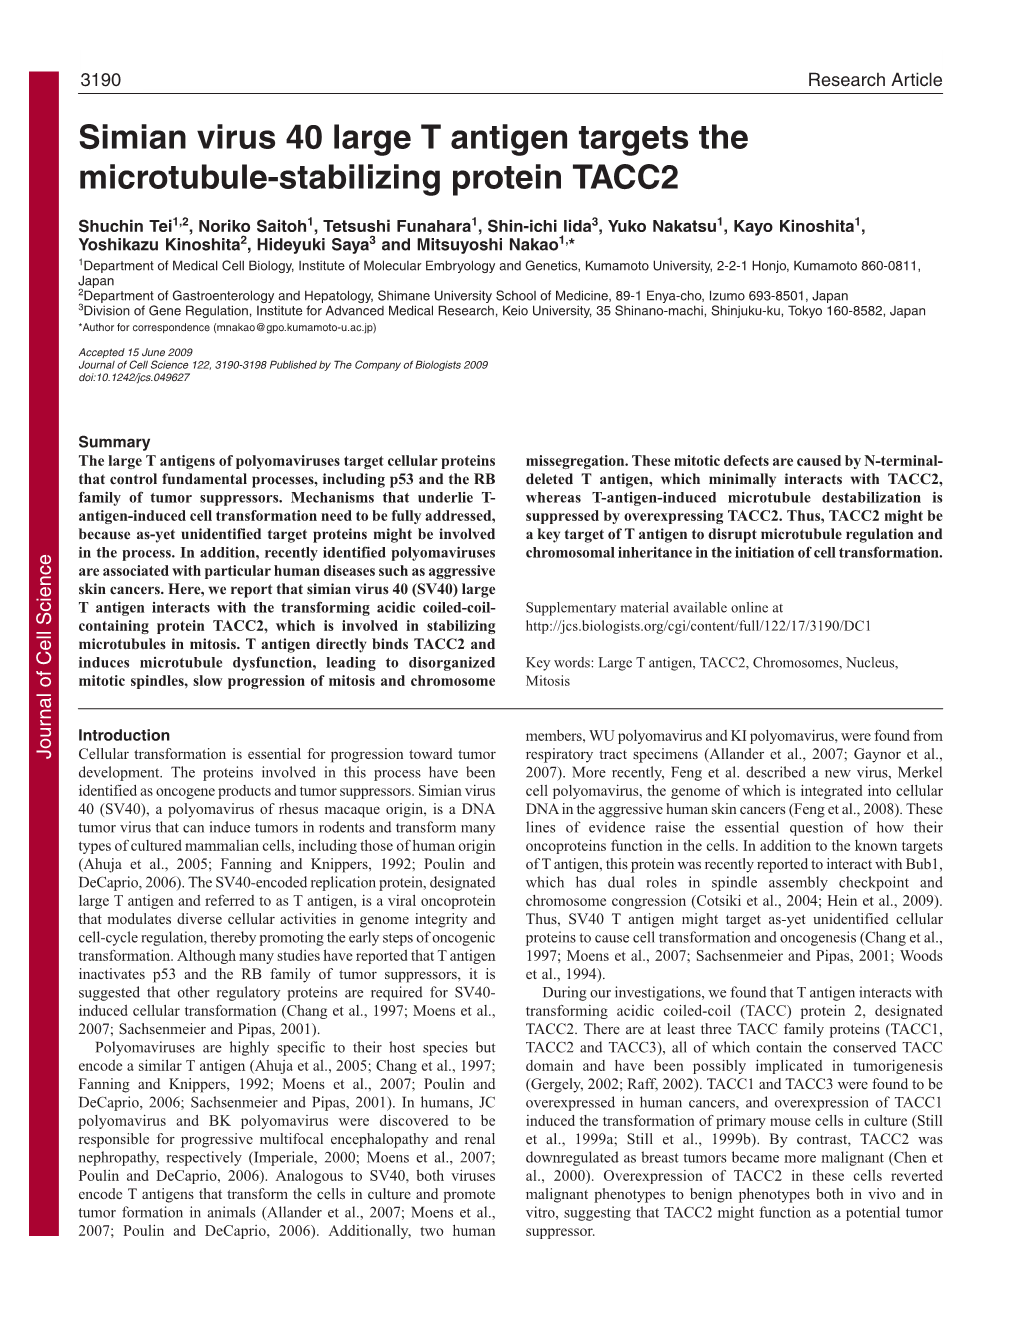 Simian Virus 40 Large T Antigen Targets the Microtubule-Stabilizing Protein TACC2